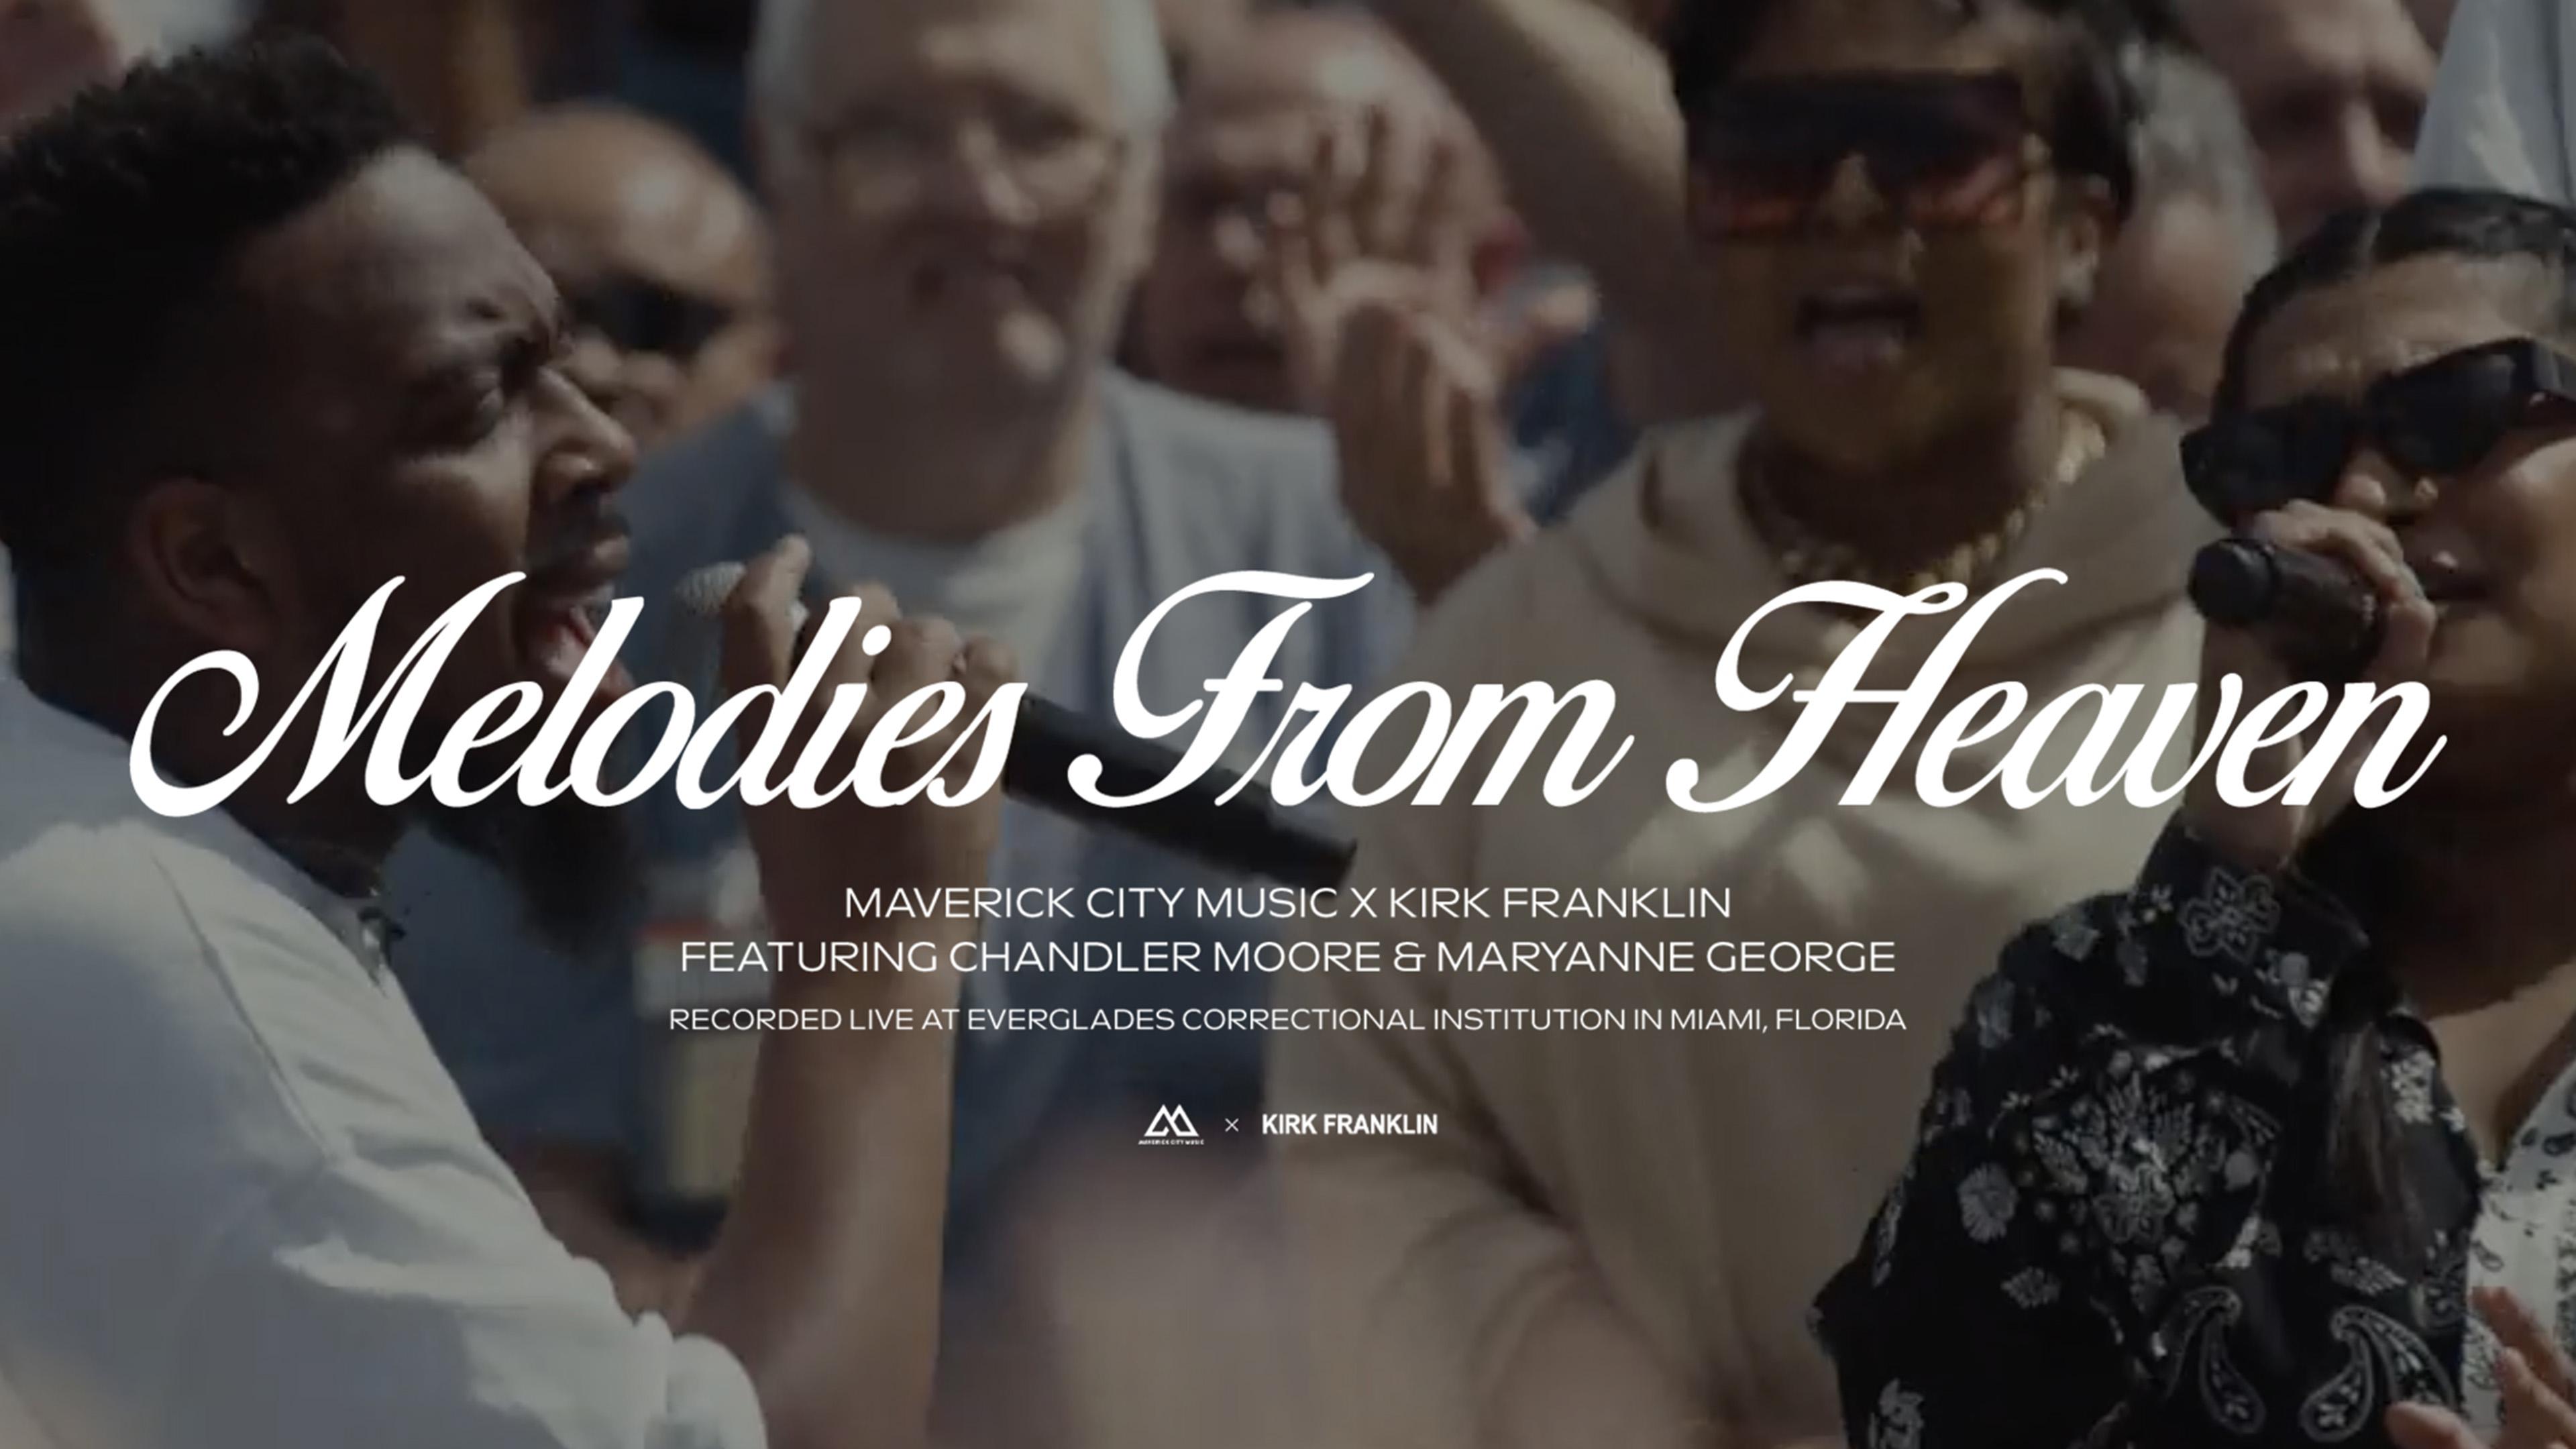 Maverick City Music - Melodies from Heaven (Music Video)